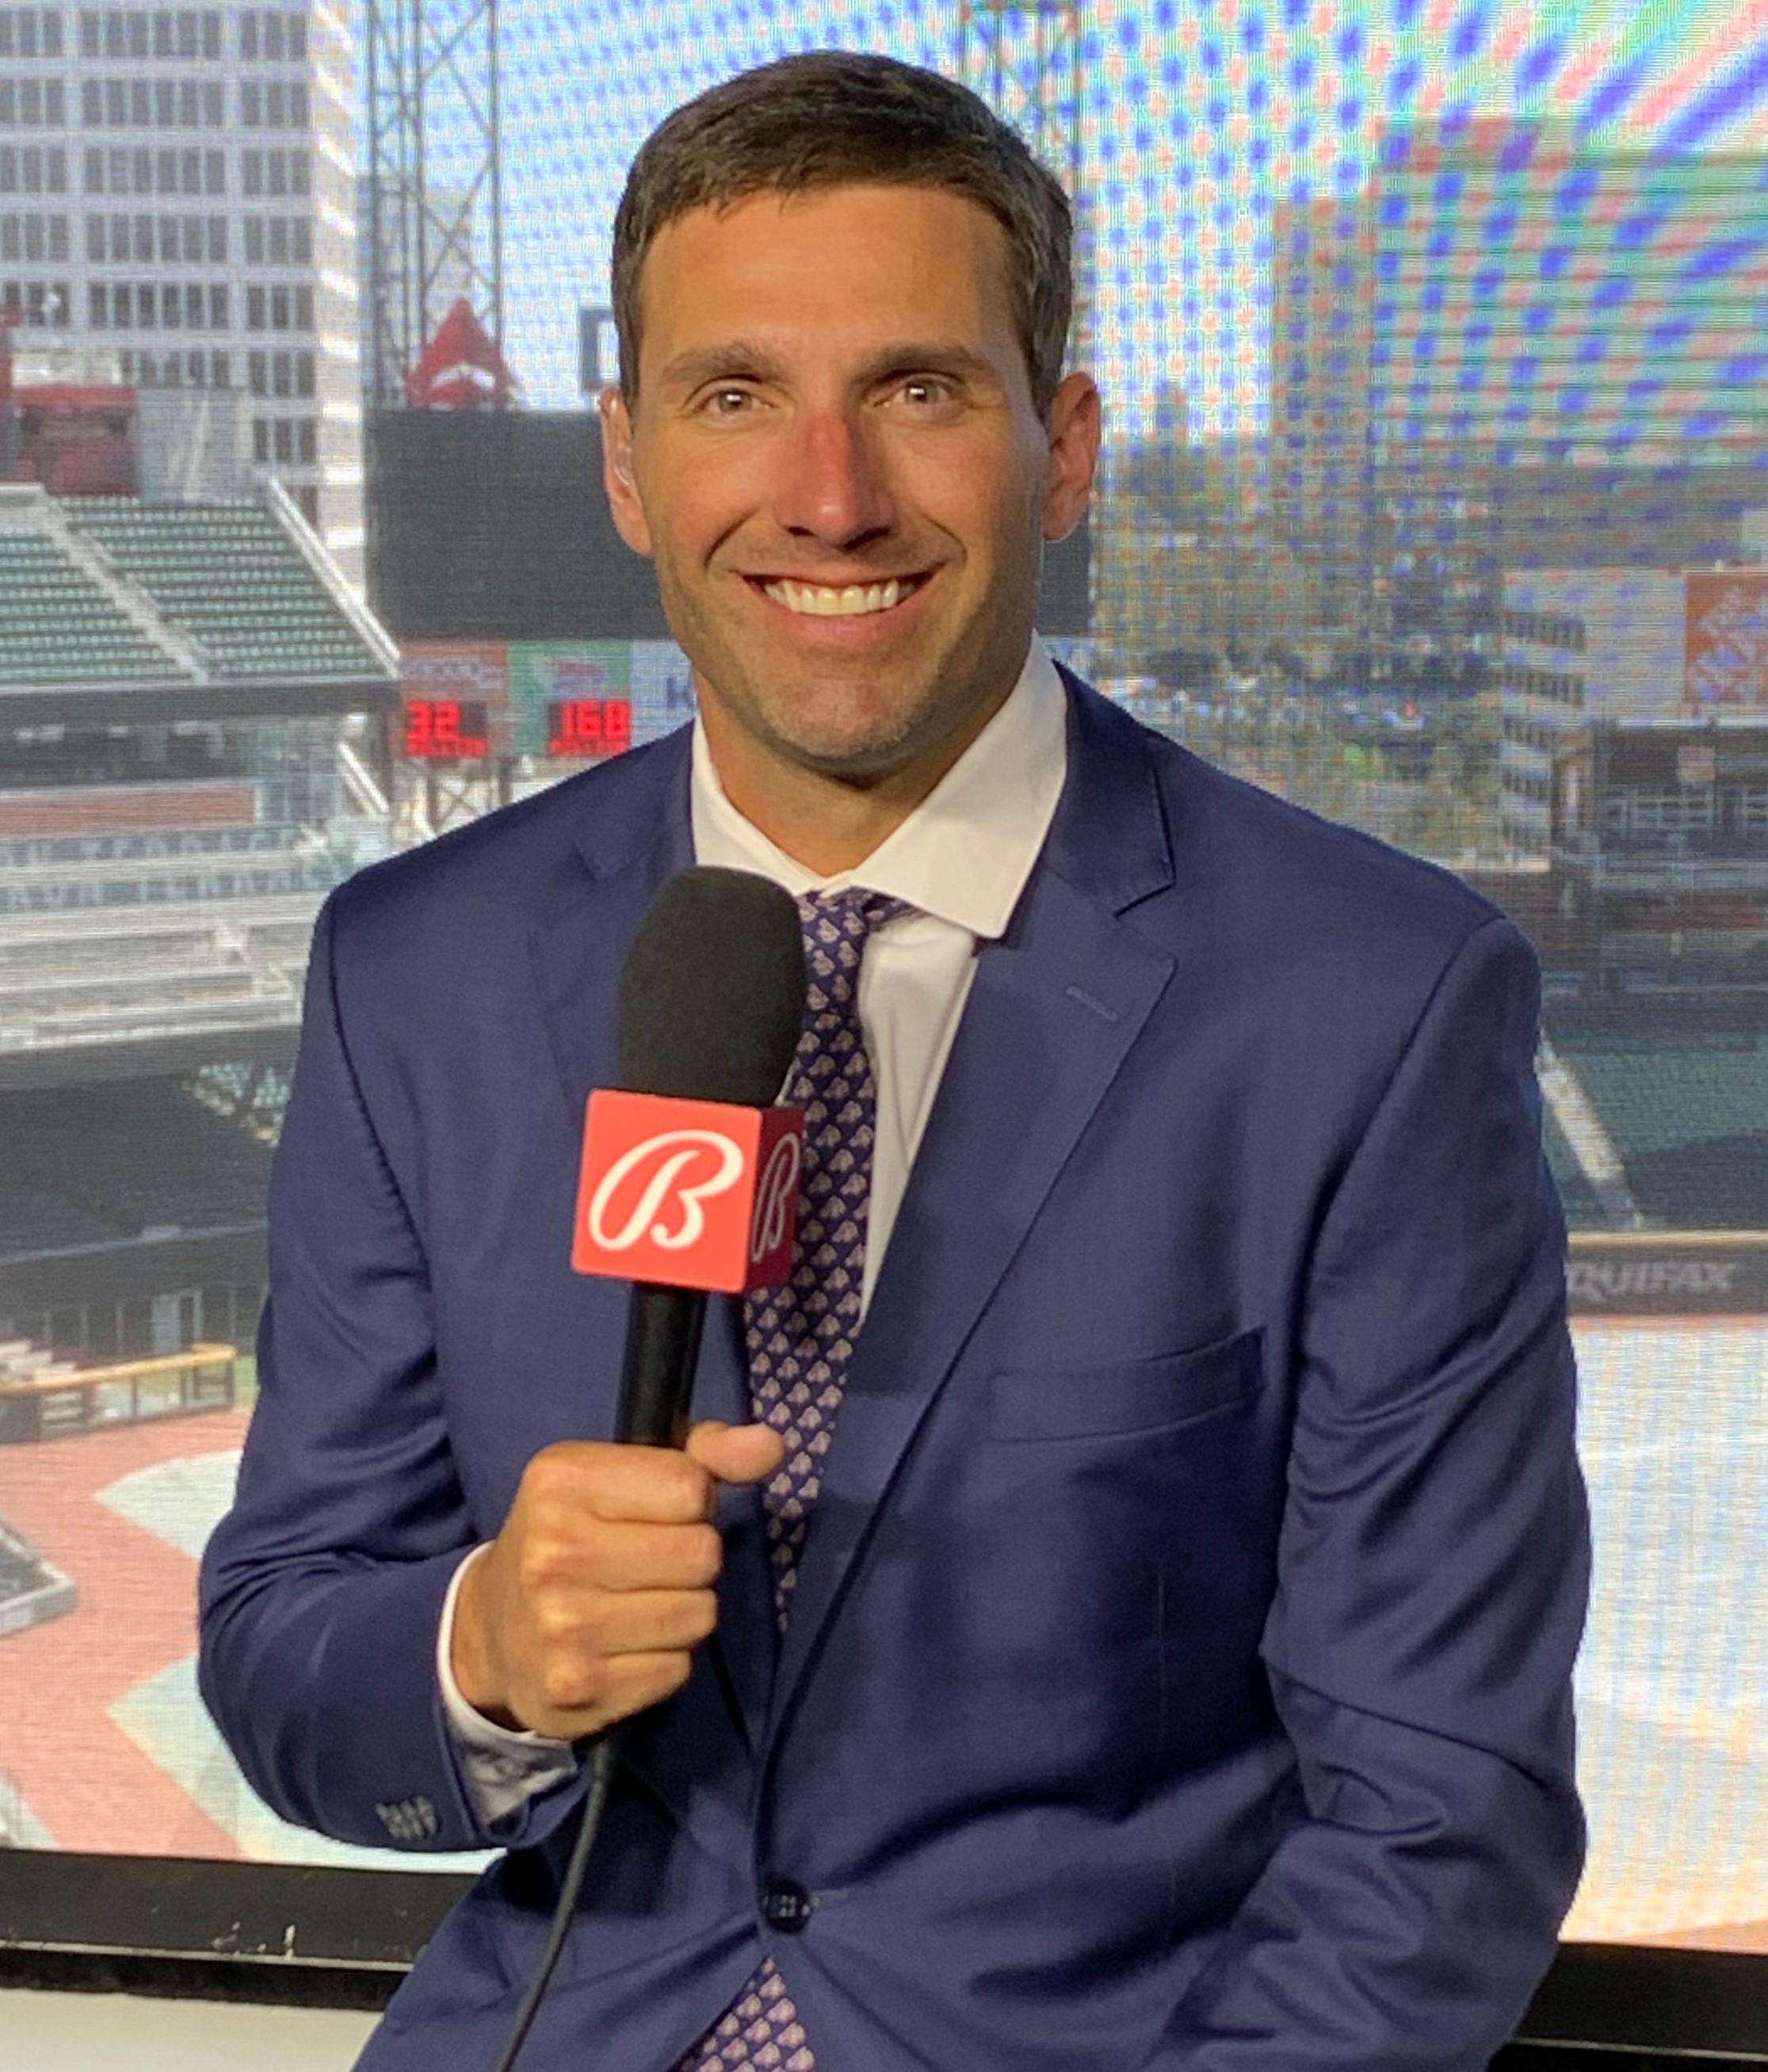 Jeff Francoeur Speaking Fee and Booking Agent Contact